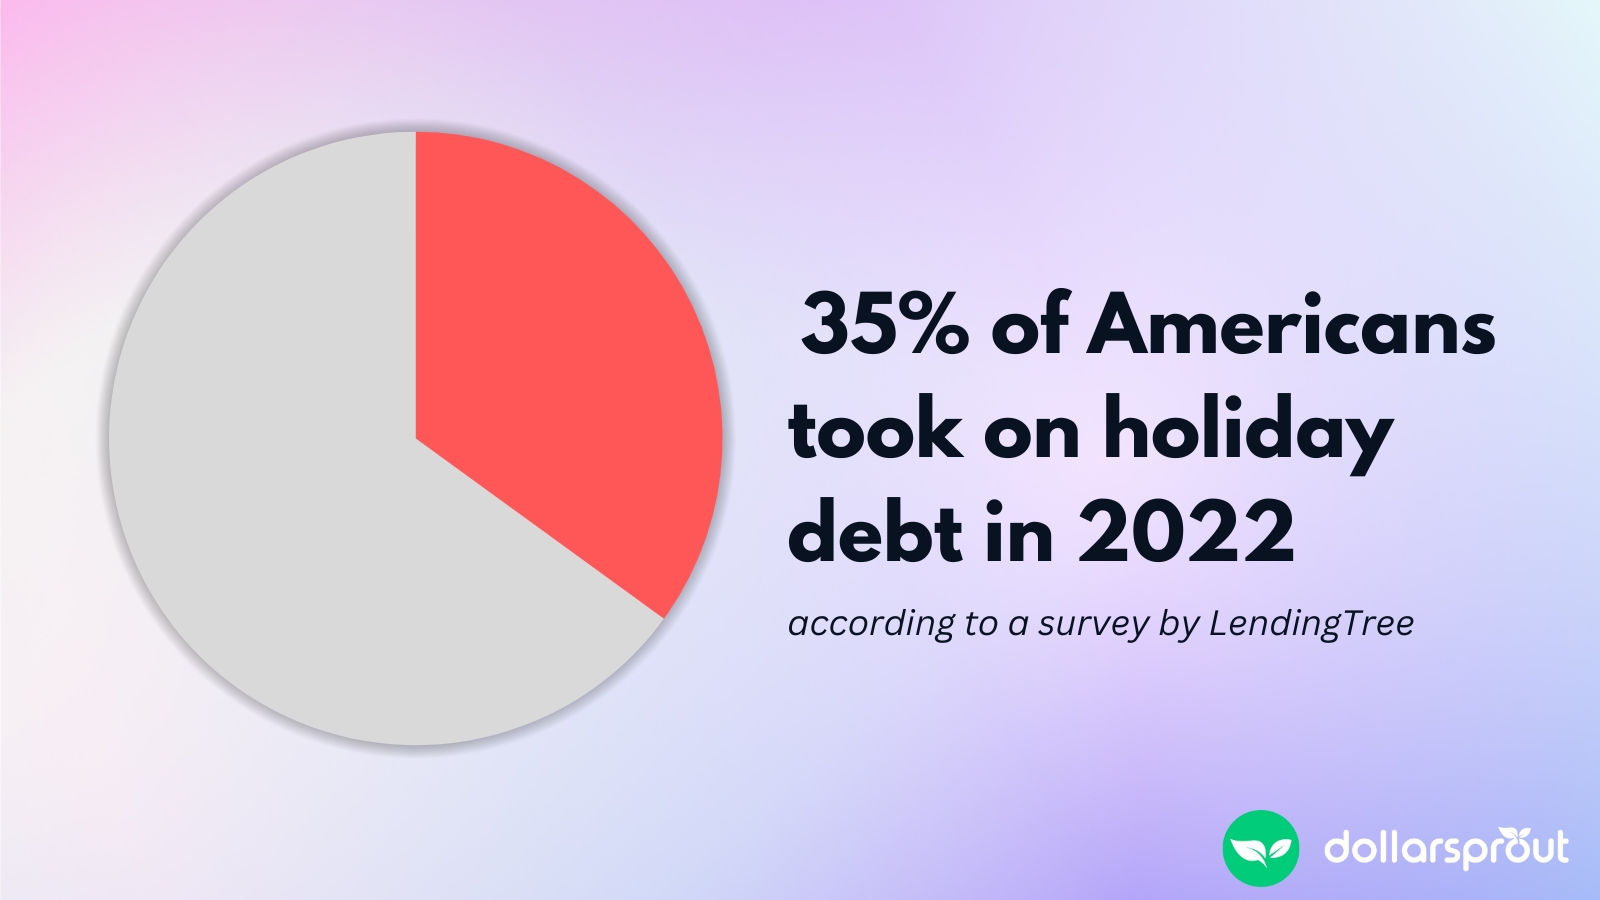 A pie chart showing that 35% of Americans took on debt to finance their holiday gift spending in 2022.